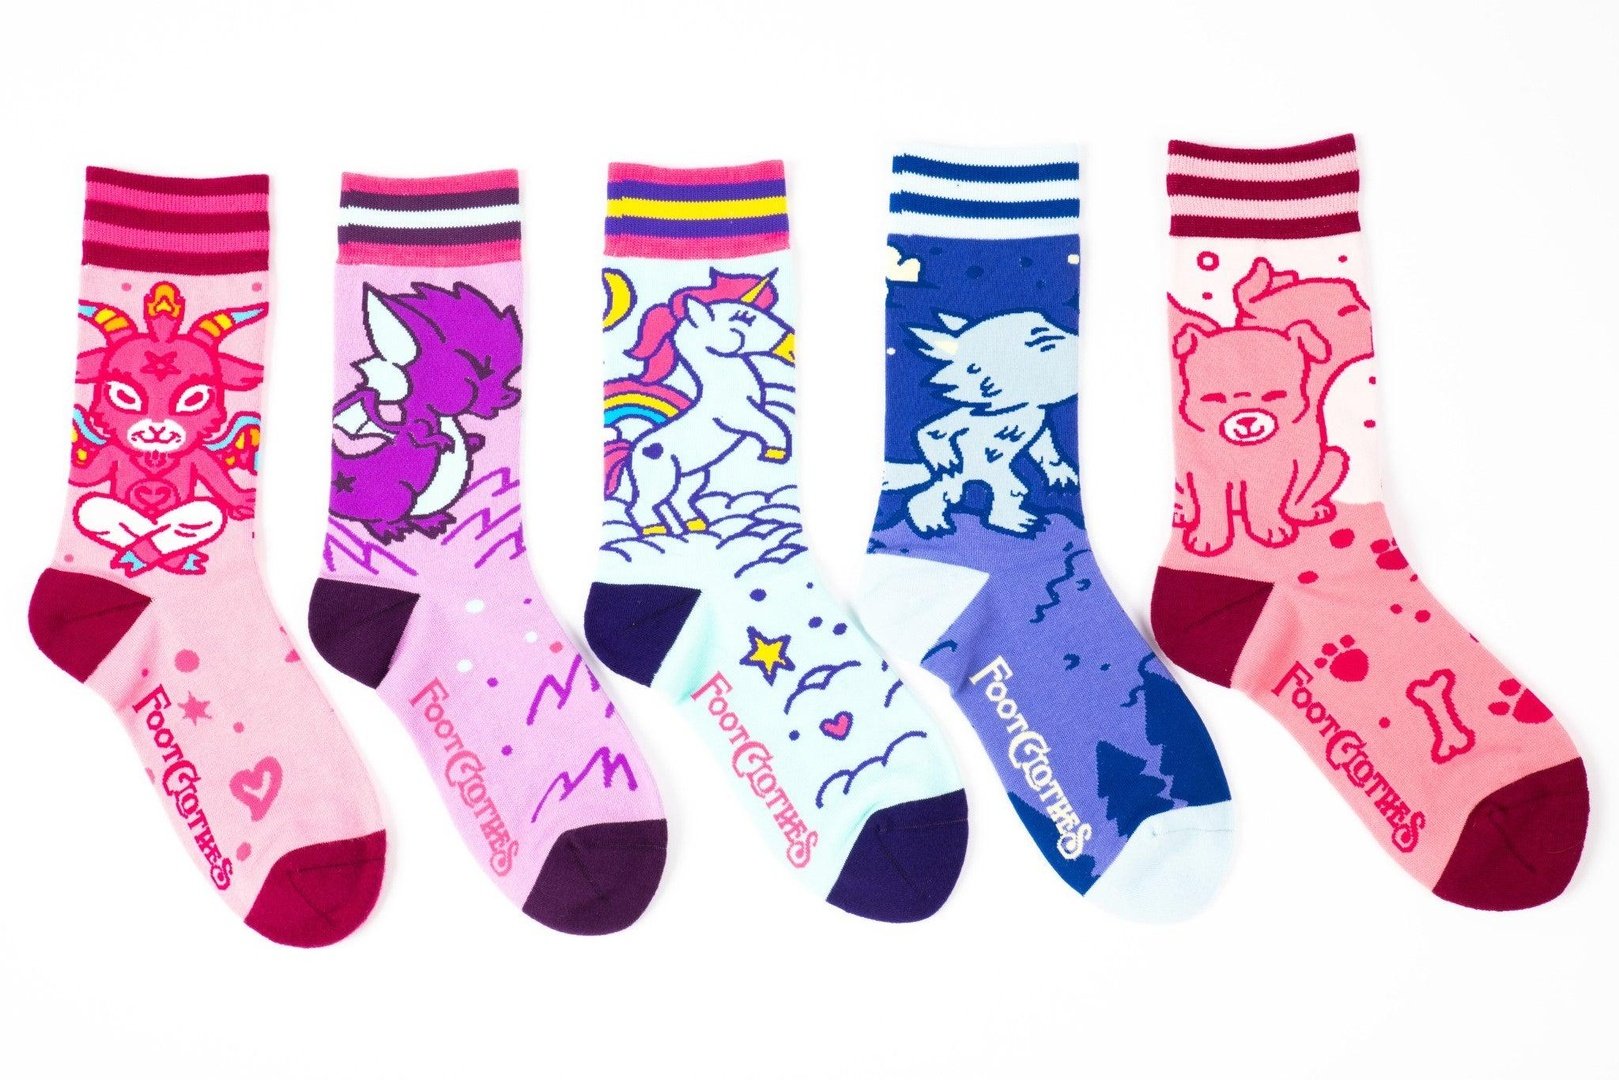 TBH CREATURE (2) Socks for Sale by ClothingCot